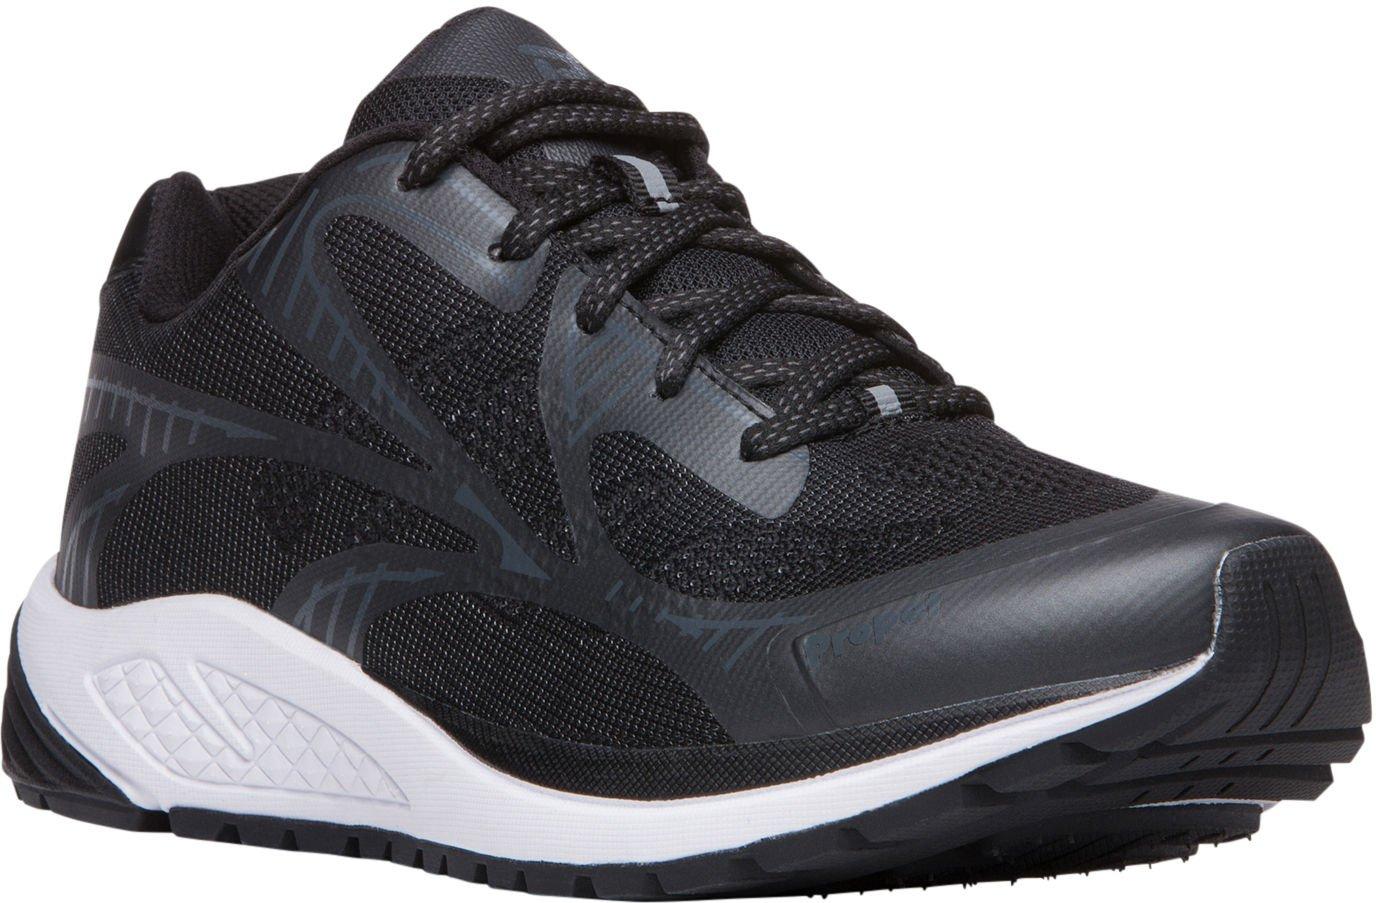 USA Mens Propet One LT Athletic Shoes